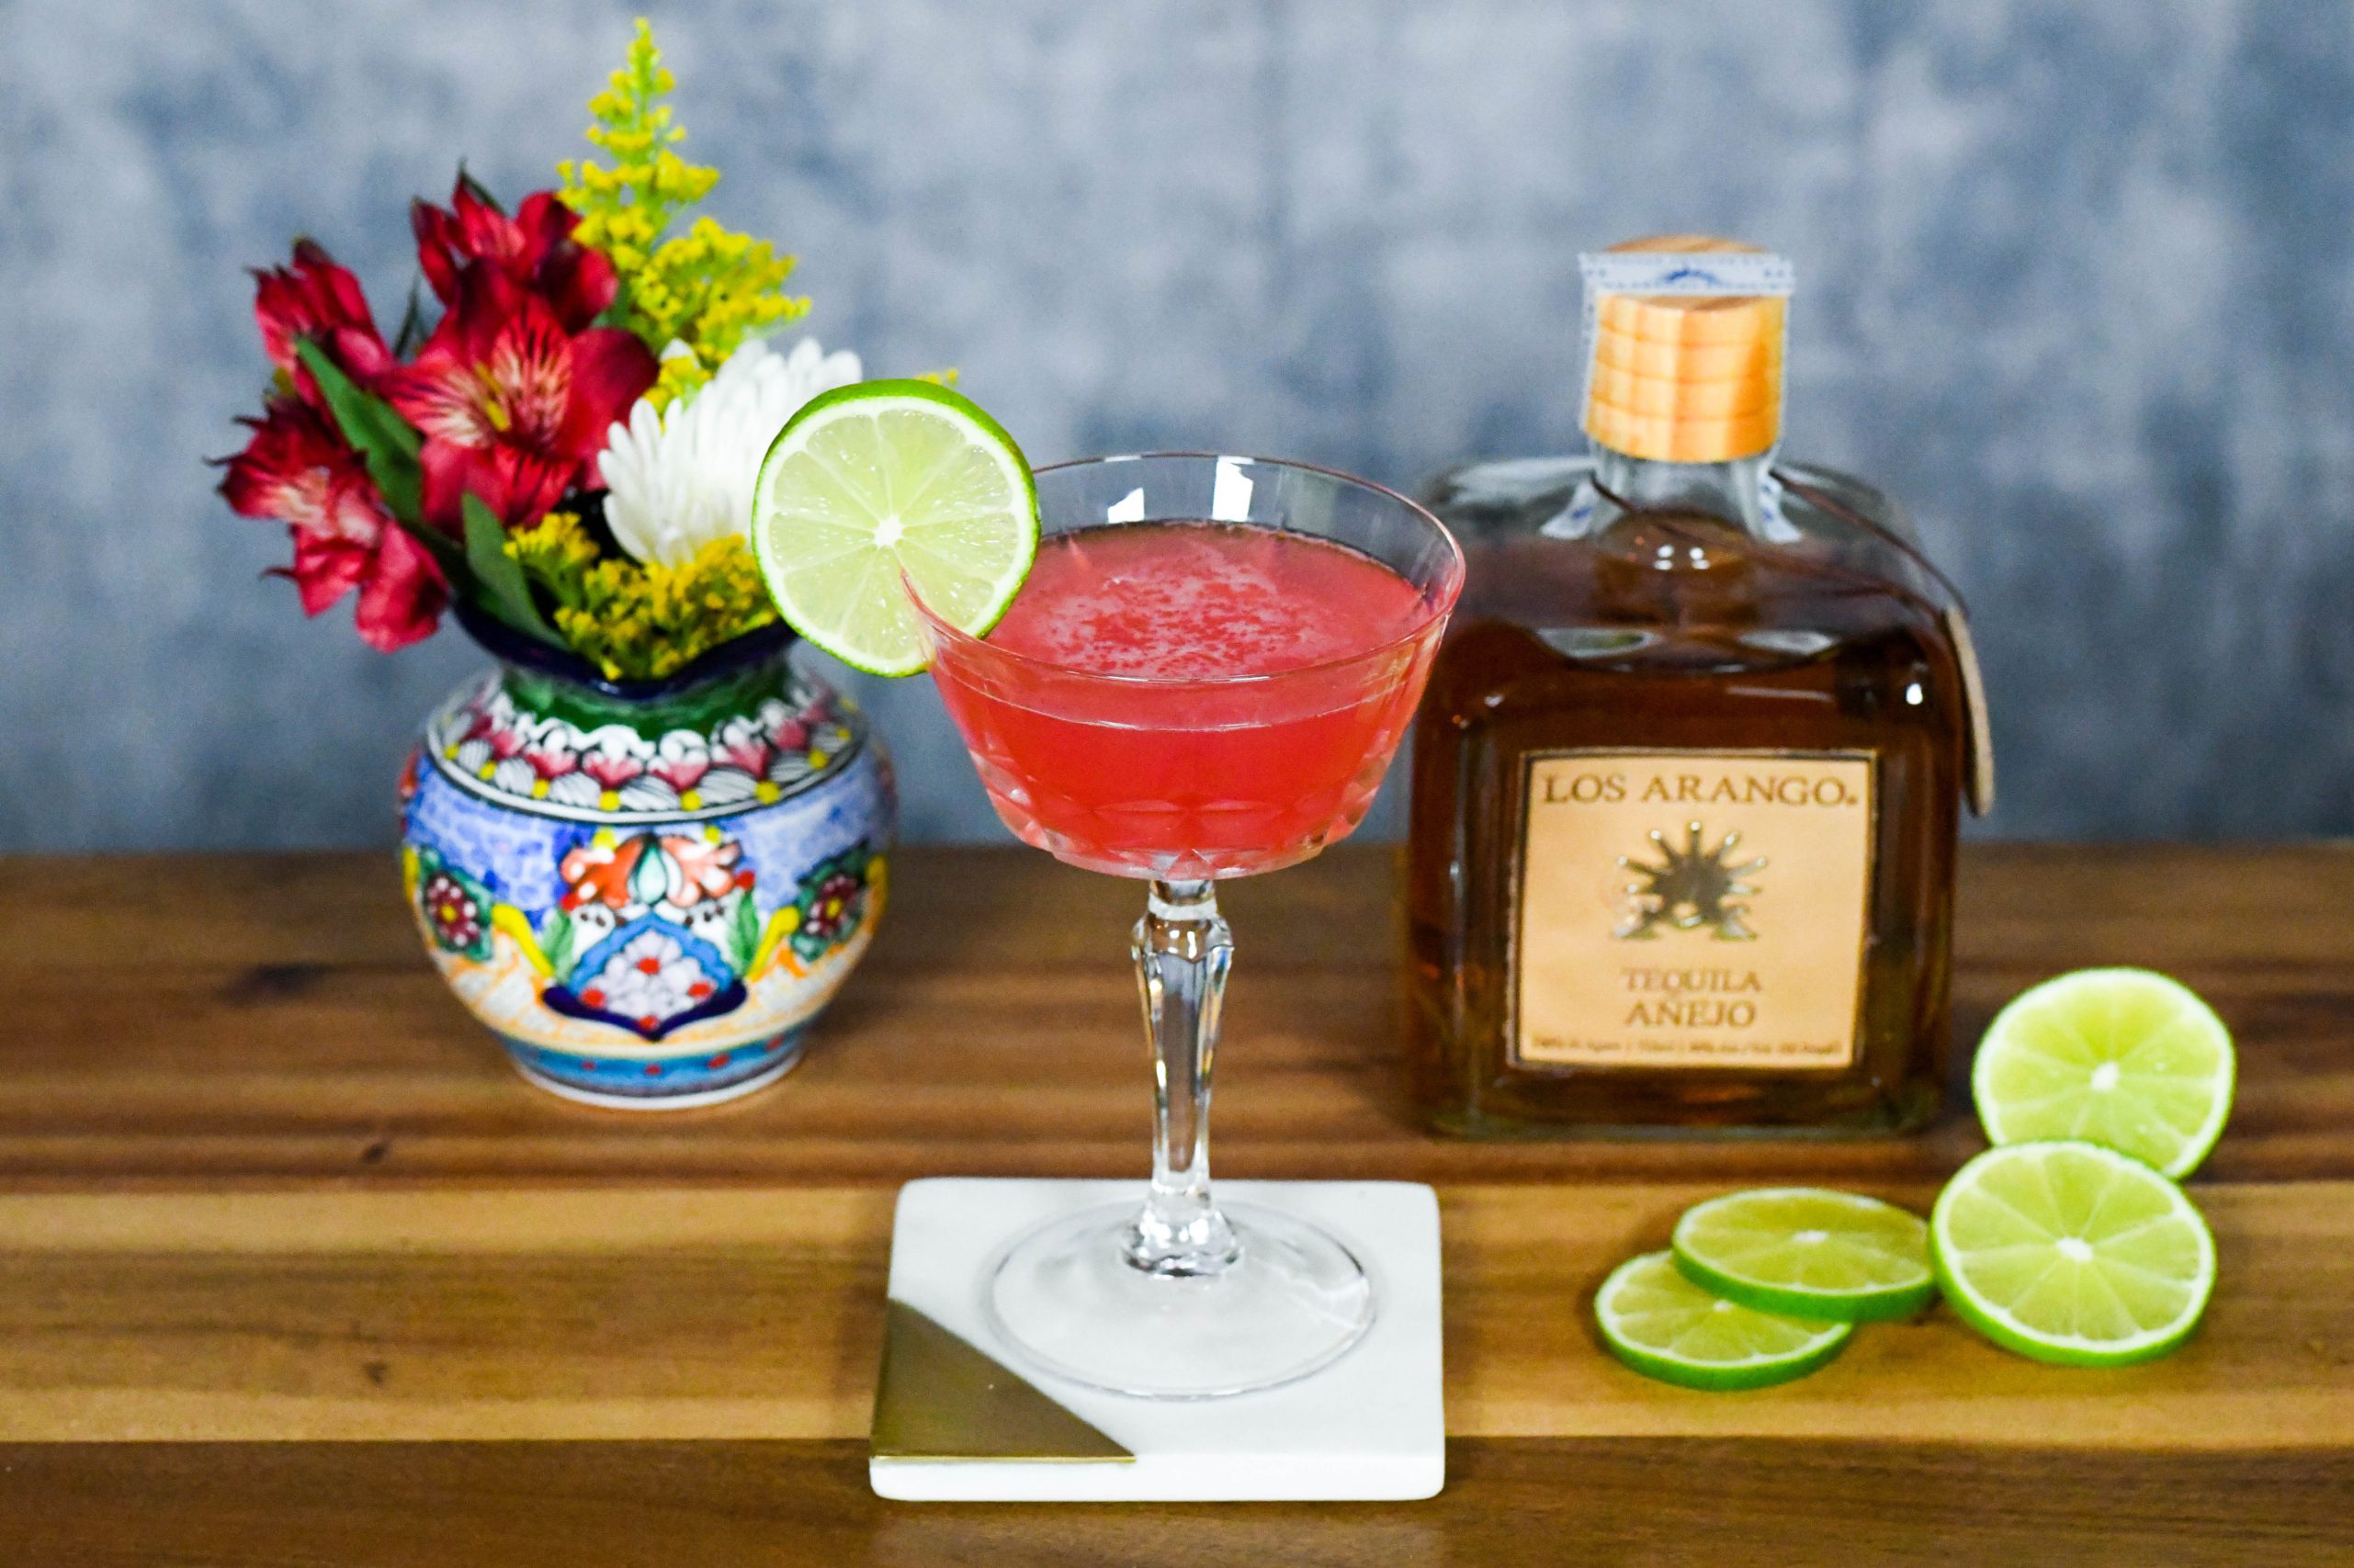 THE BEST COCKTAILS TO DRINK ON NATIONAL TEQUILA DAY